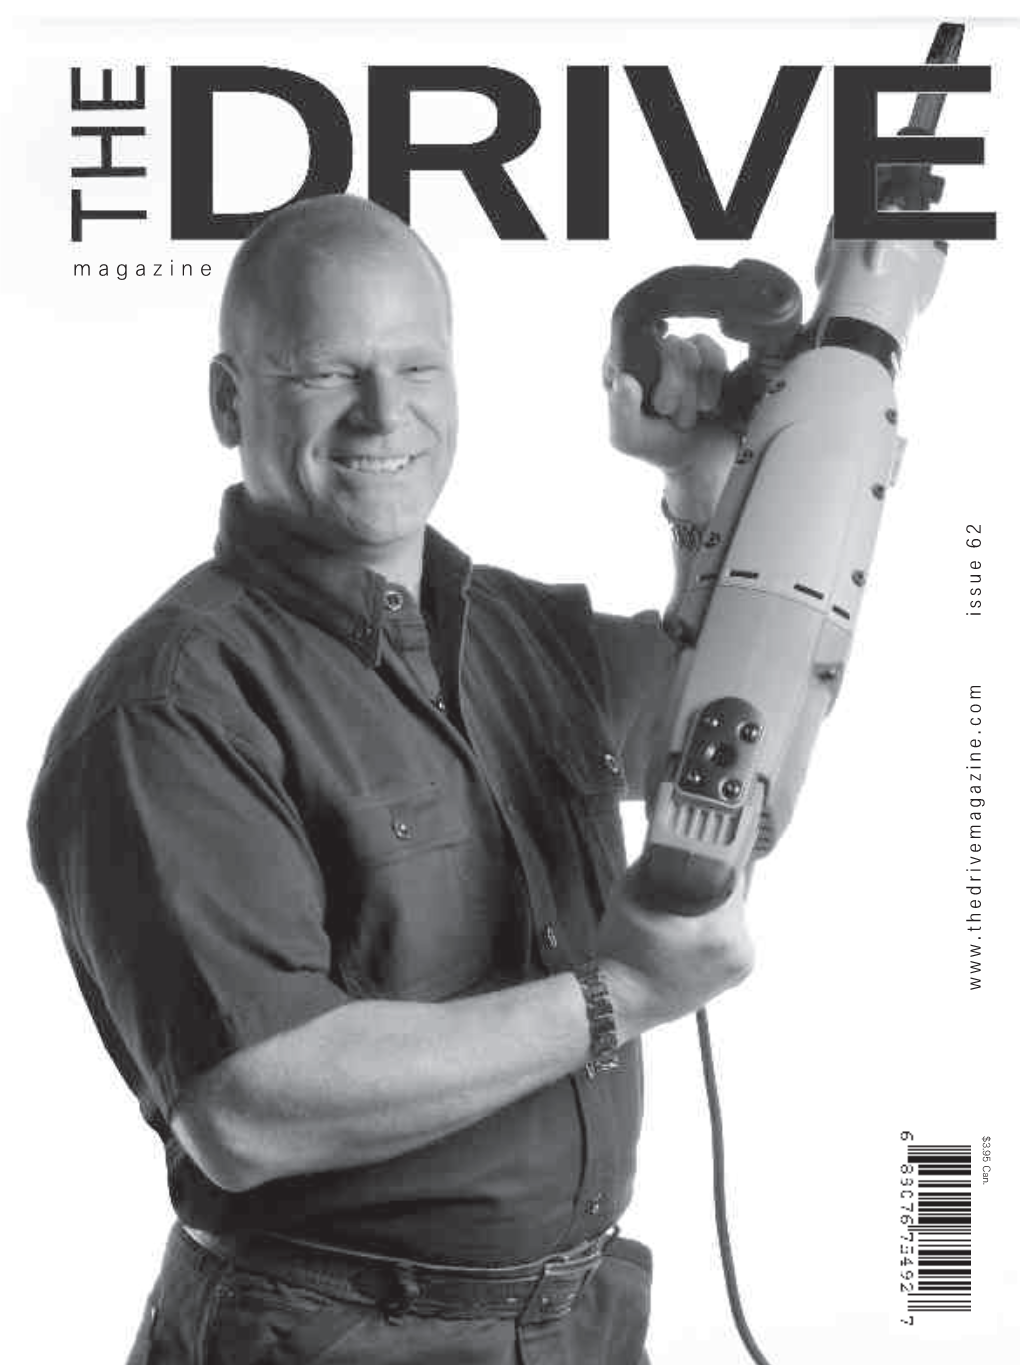 Read the Mike Holmes Q&A Here